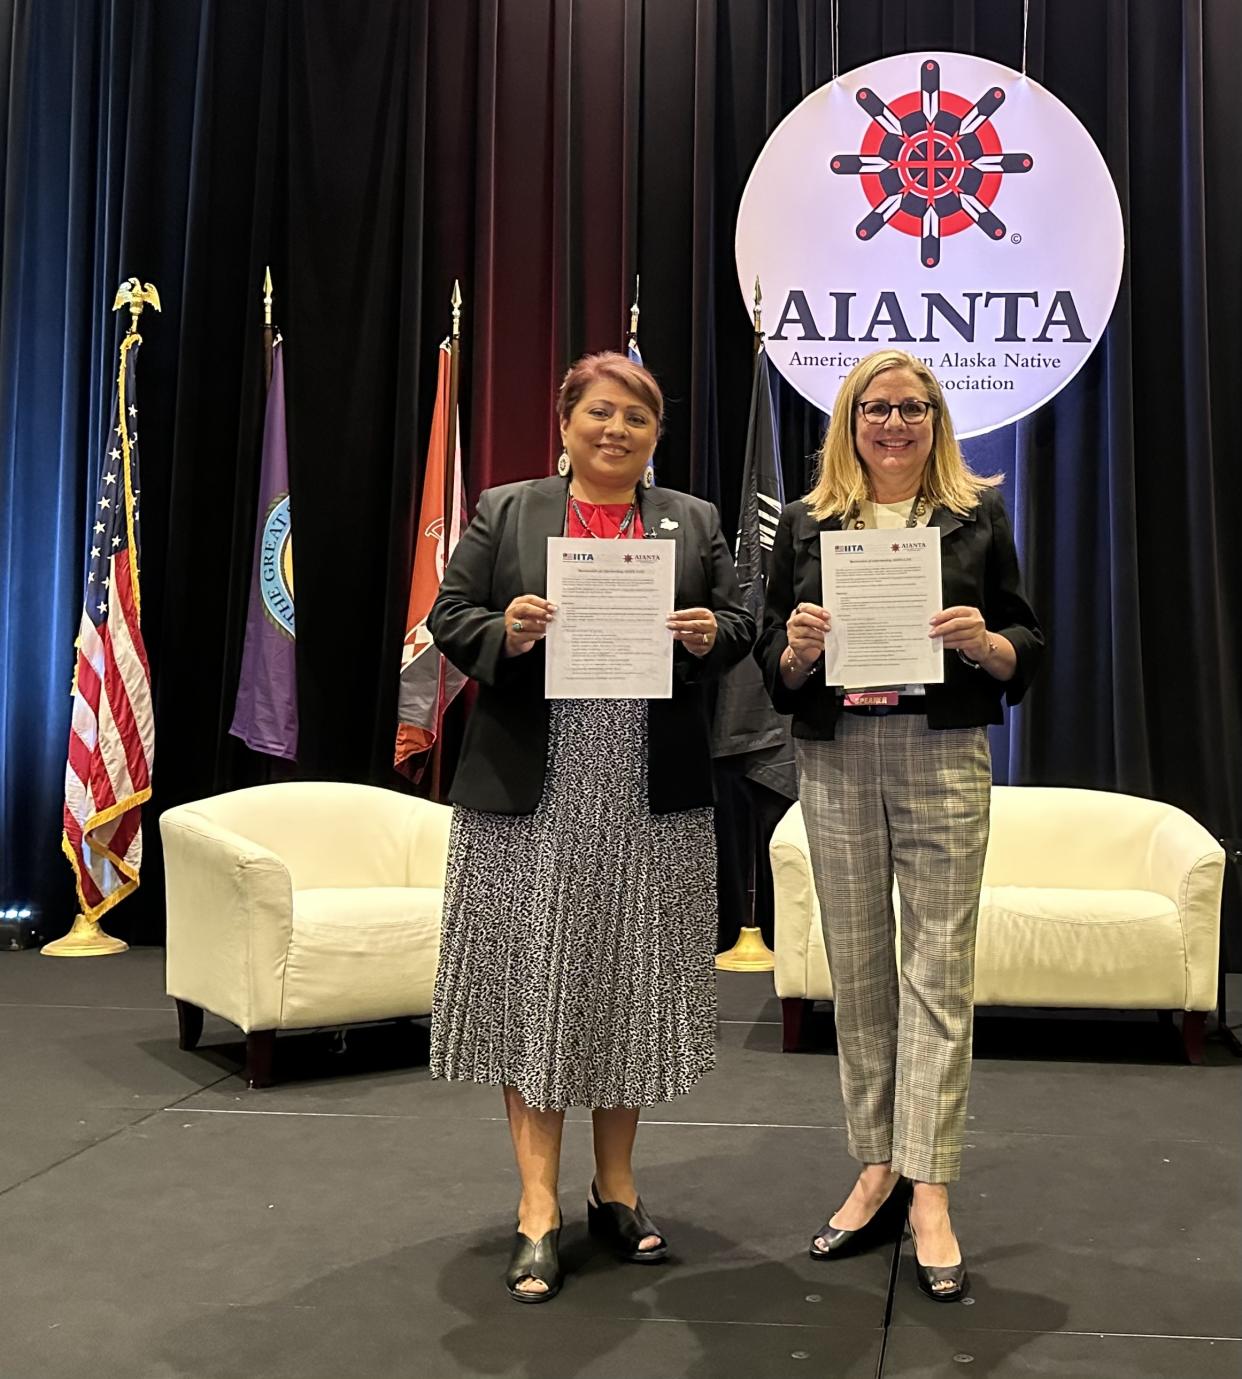 AIANTA // Caption: AIANTA CEO Sherry L. Rupert (left) and IITA CEO & Executive Director Lisa Simon sign the MOU at the 25th Annual American Indigenous Tourism Conference. (Photo/Courtesy of AIANTA)